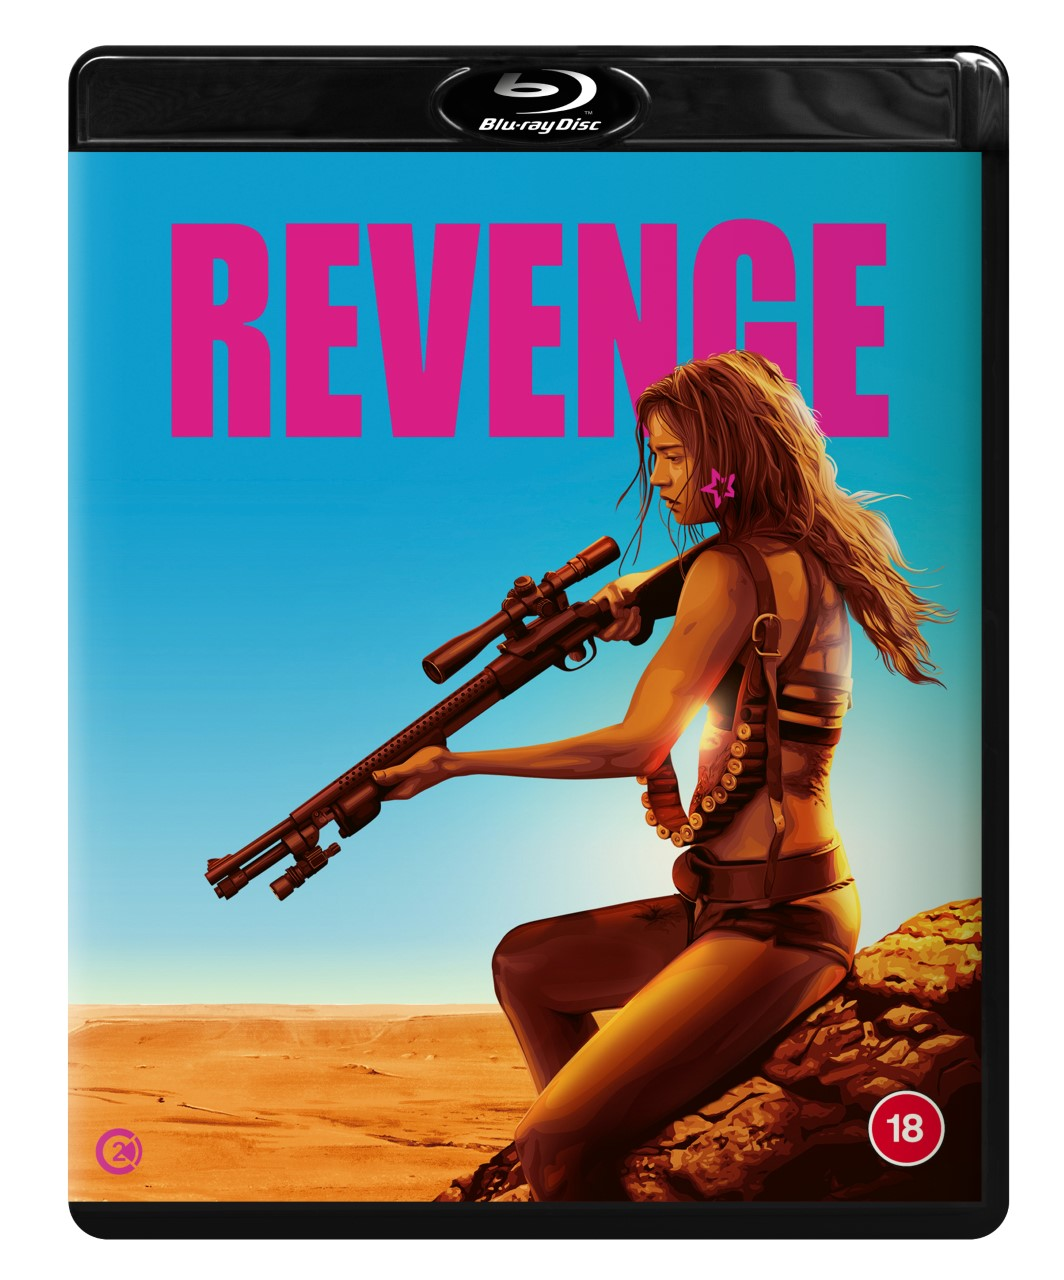 boom competitions -  win Revenge on Blu-ray